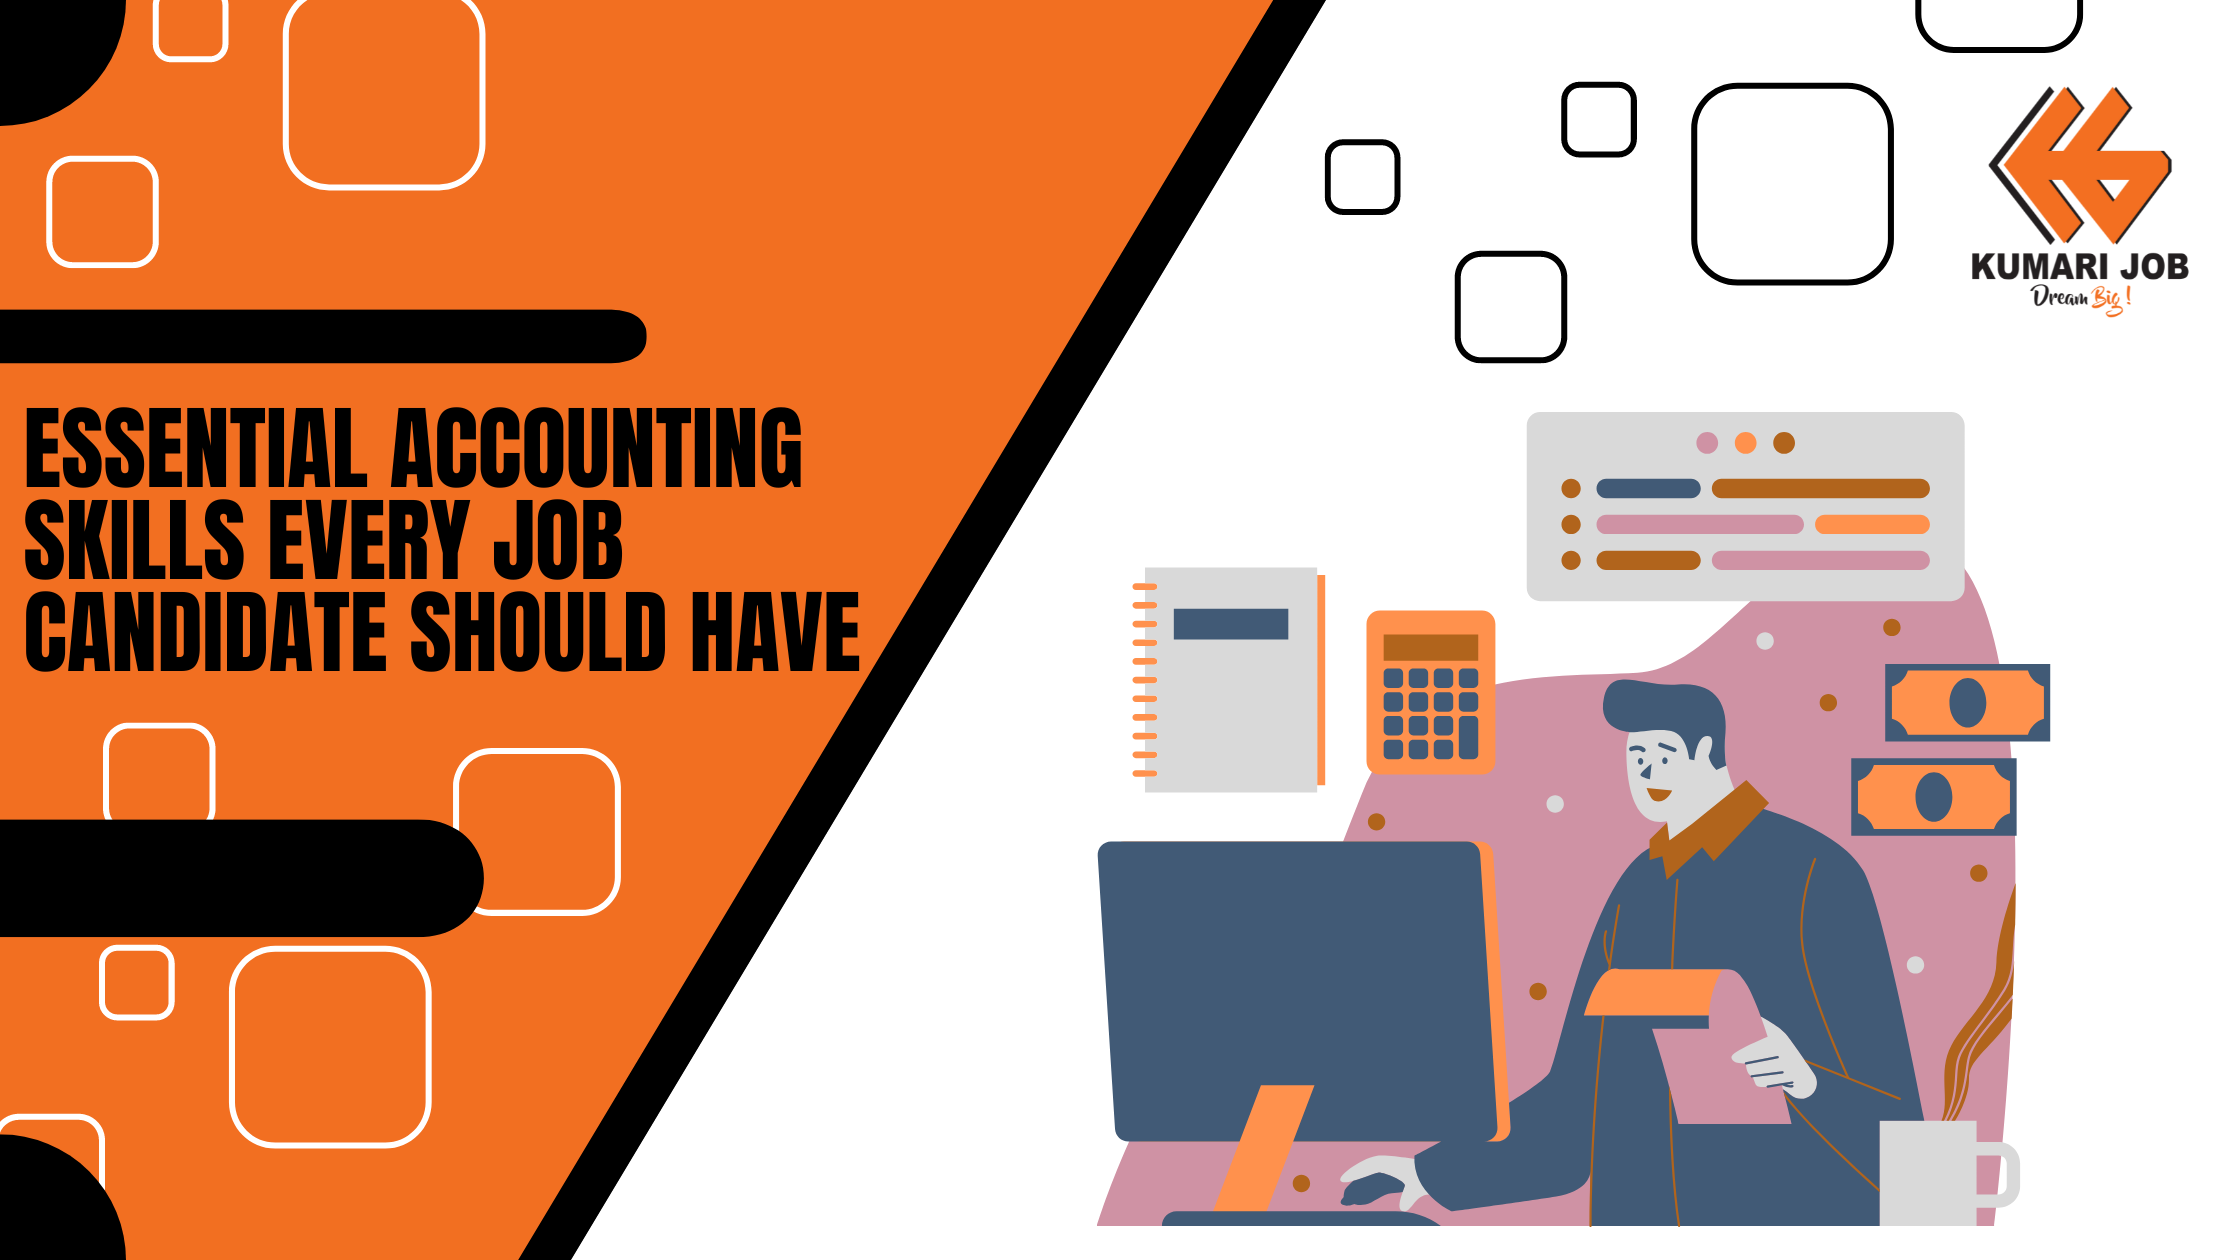 Essential Accounting Skills Every Job Candidate Should Have